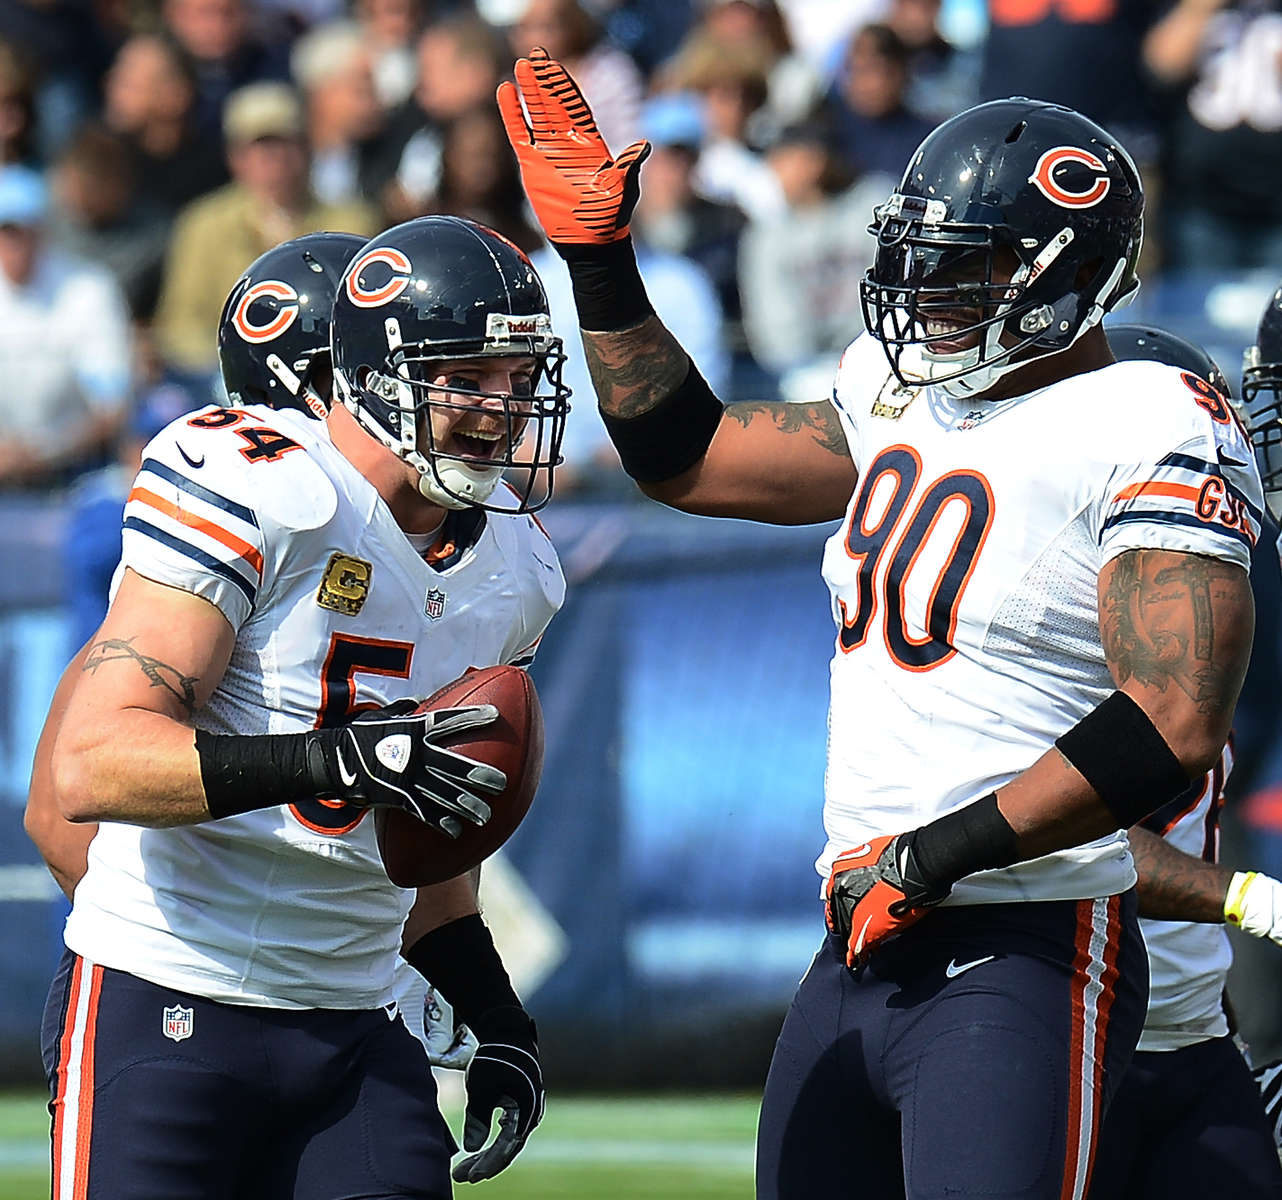 Chicago Bears middle linebacker Brian Urlacher celebrates with teammate defensive end Julius Peppers after Urlacher recovered a fumble by Tennessee Titans wide receiver Kenny Britt in the first half on Nov. 4, 2012 in Nashville, Tenn. (The Tennessean/ Mark Zaleski)